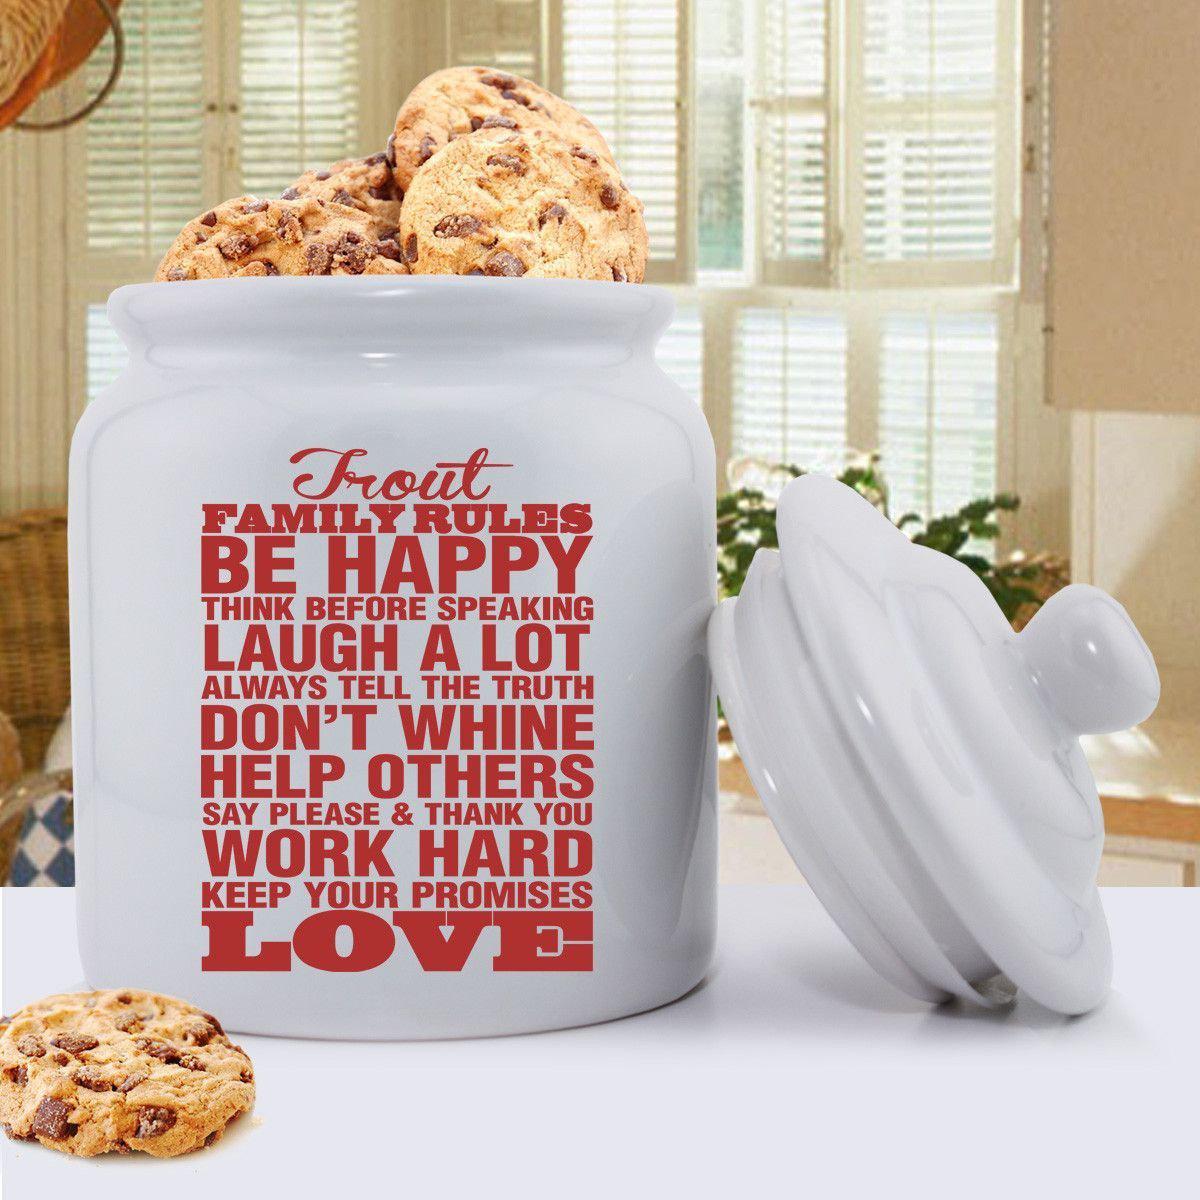 Personalized Antique Style Family Rules Cookie Jar